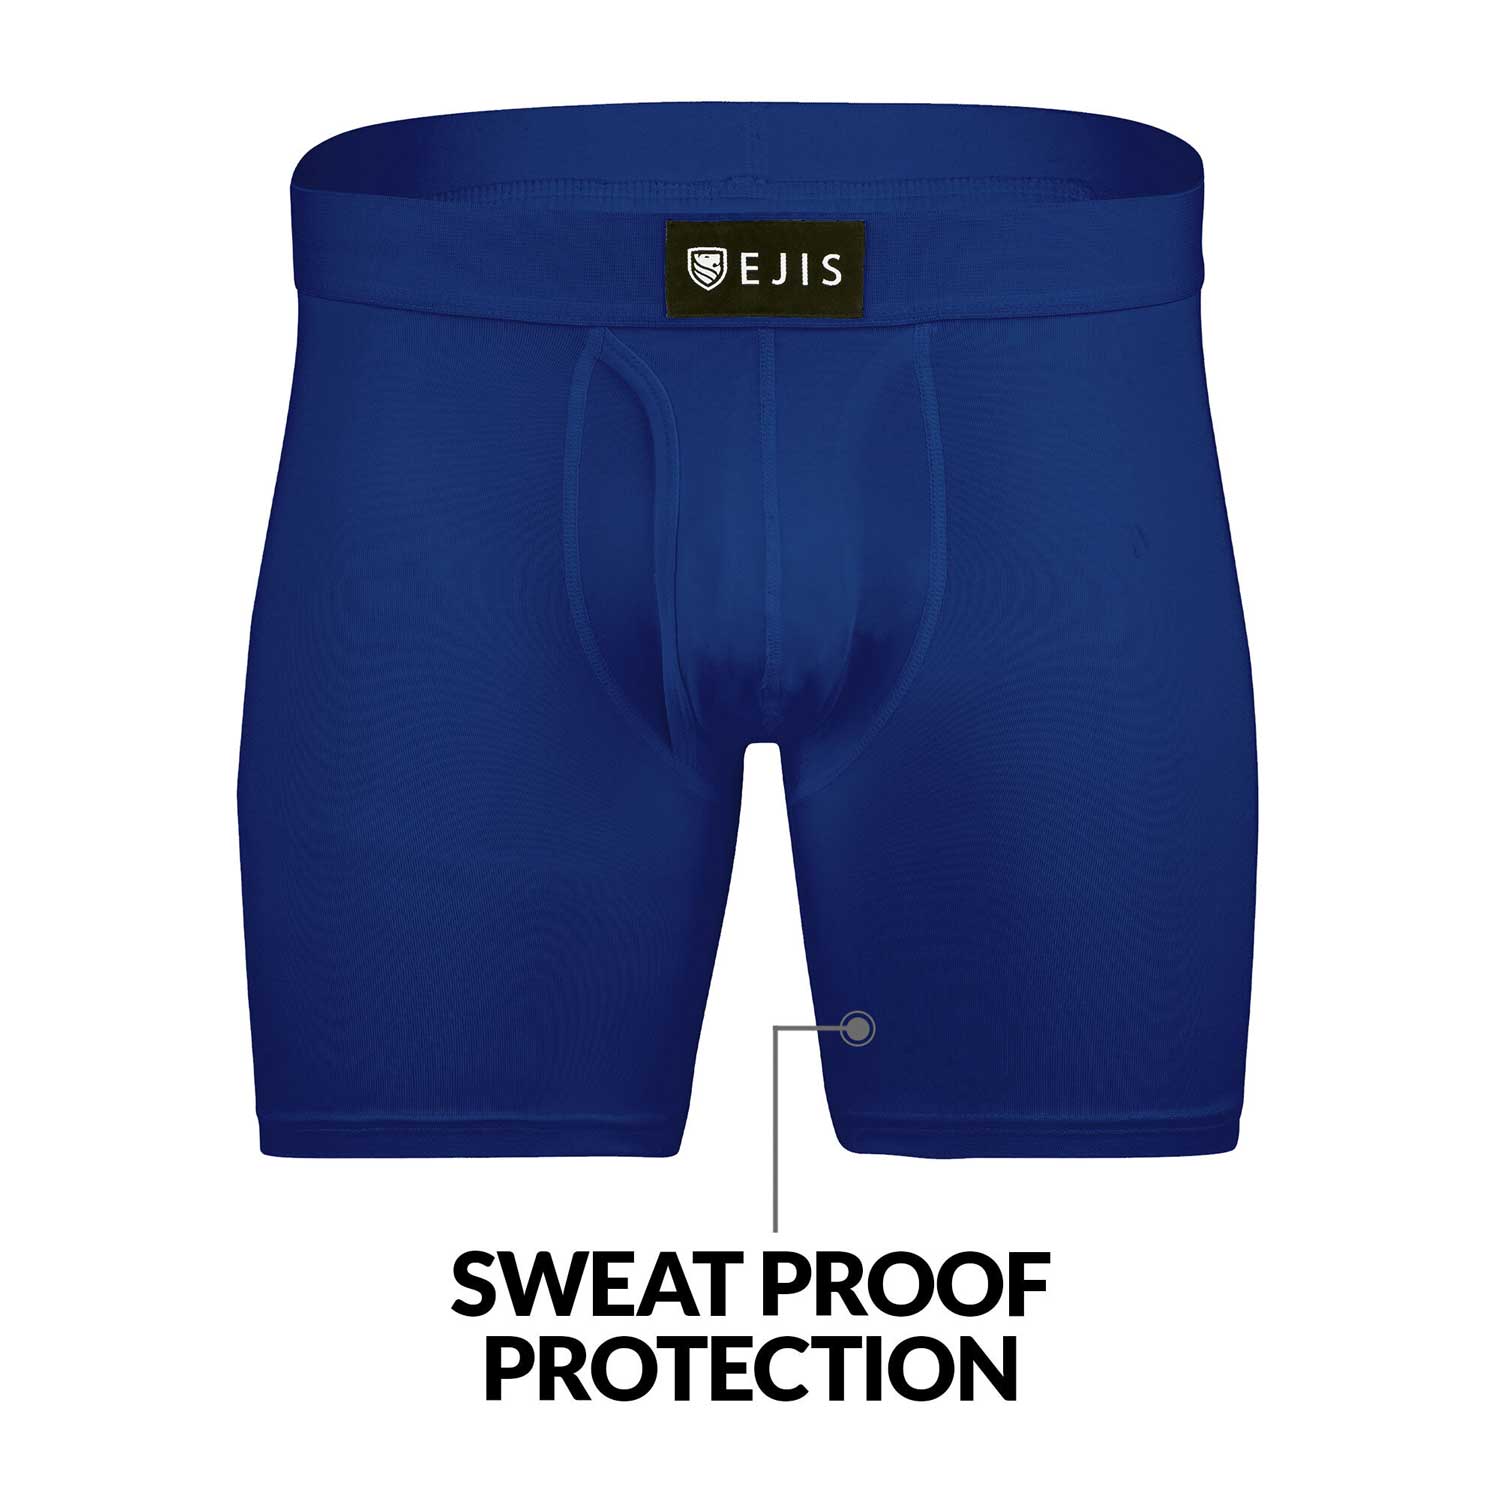 Ejis Sweat Proof Undershirts and Boxer Briefs. Get Some Wearable